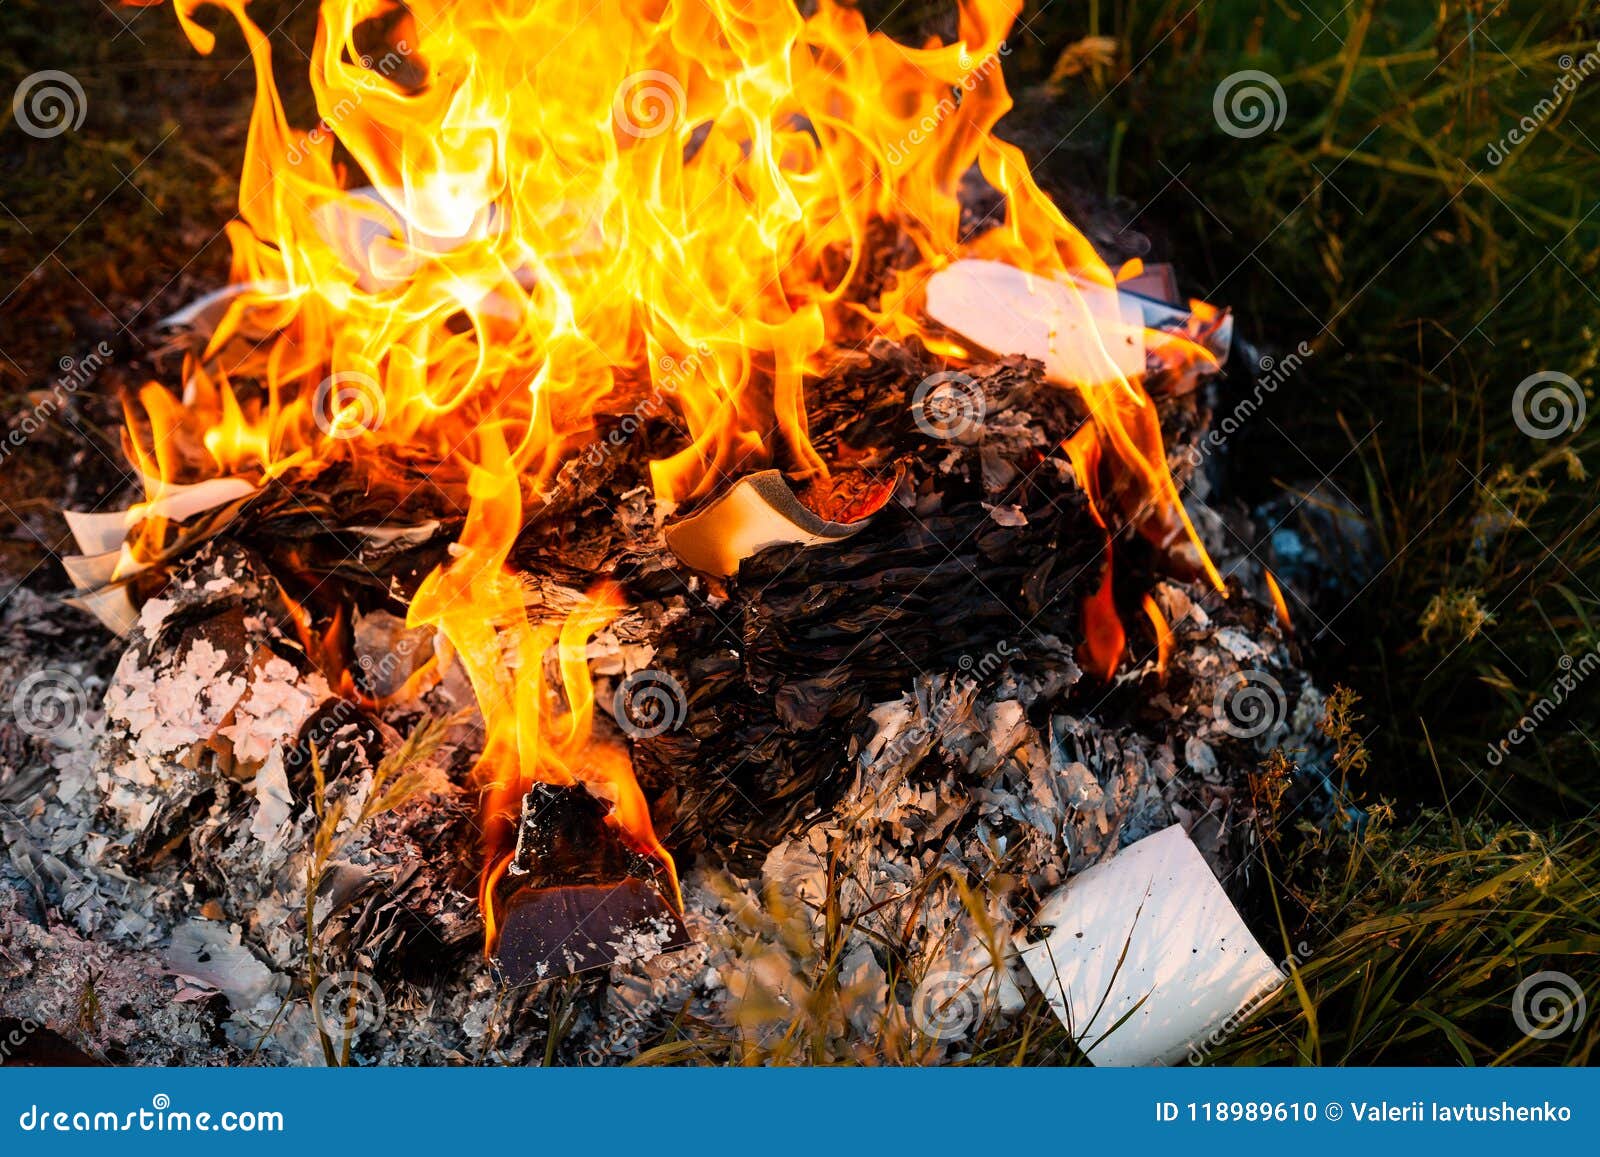 Fire from Old Unknown Photographs at Summer Evening Stock Photo - Image ...